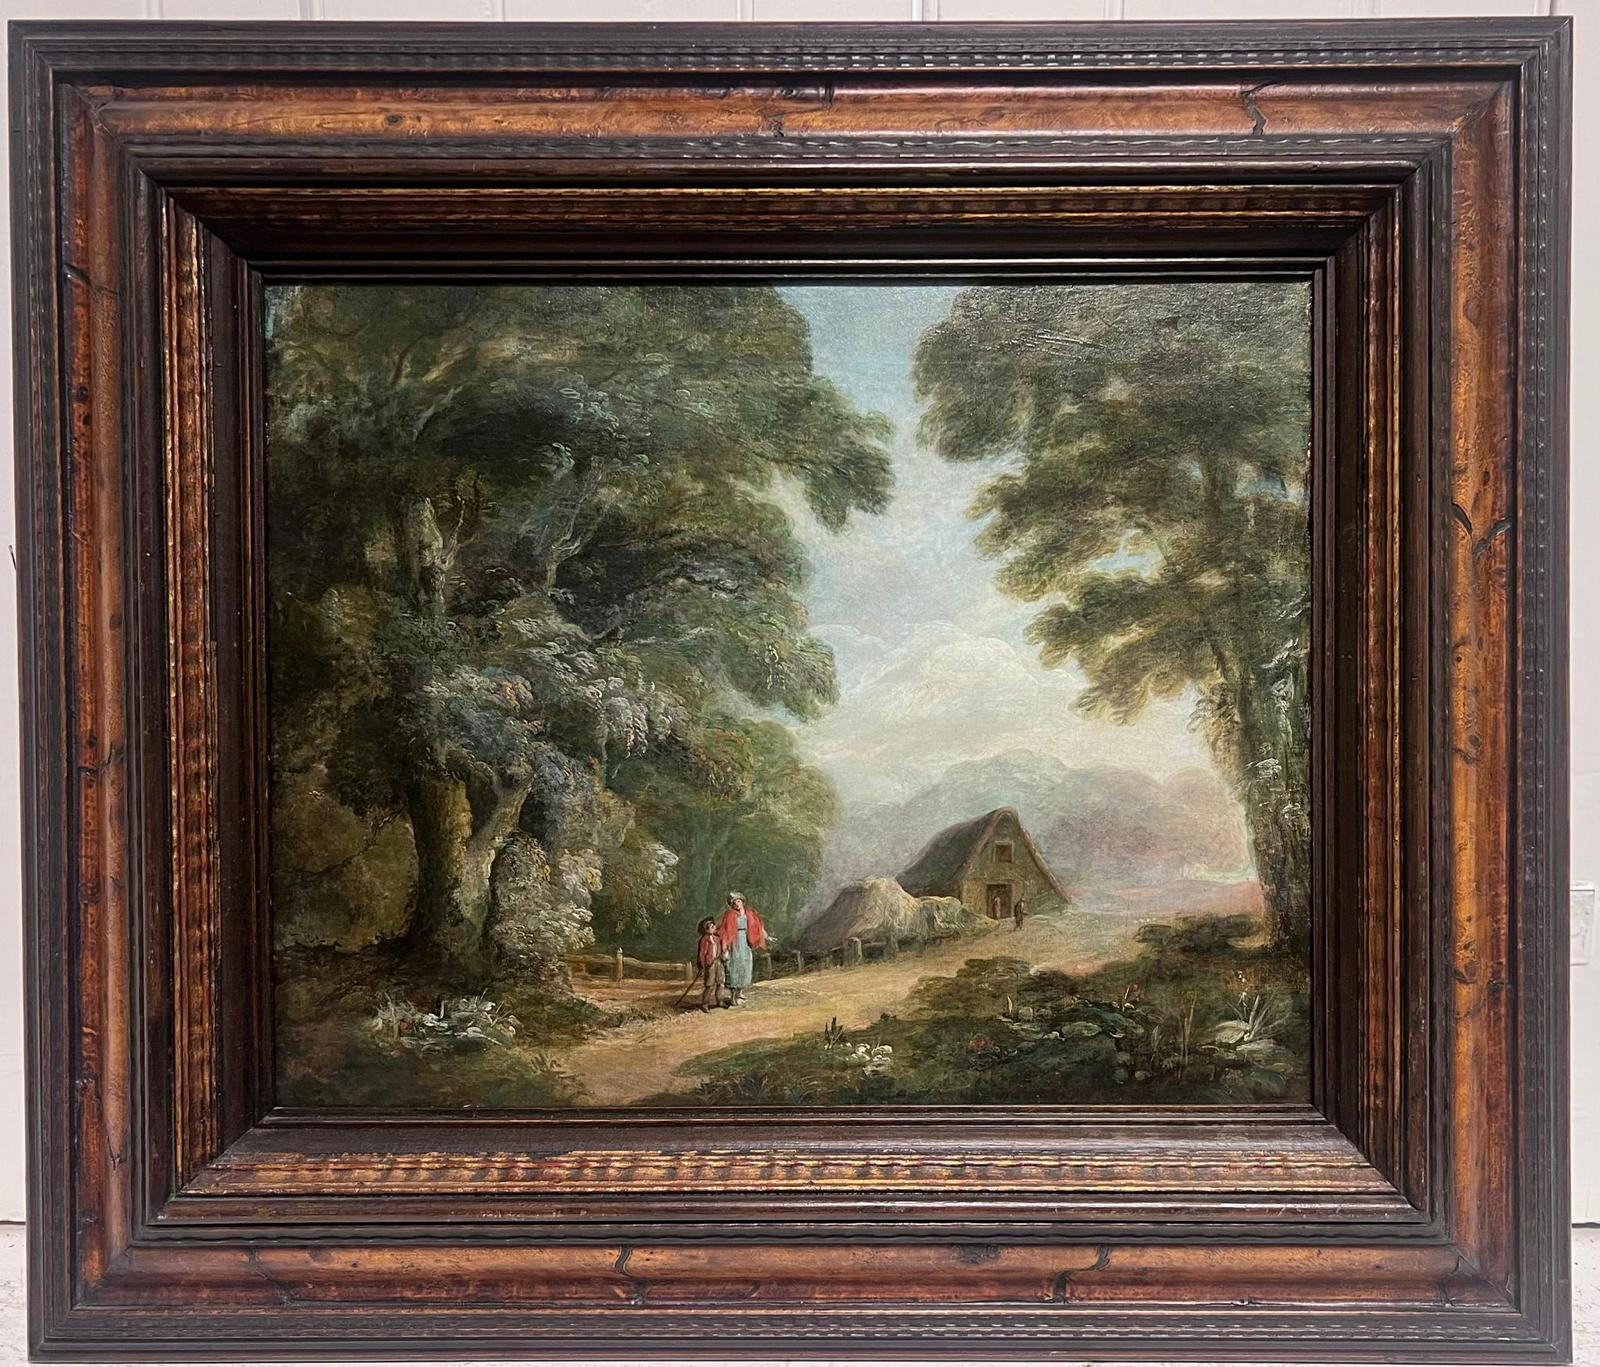 Fine c. 1800s English Country Landscape Figures in Golden Light Wooded Landscape - Painting by Thomas Barker of Bath